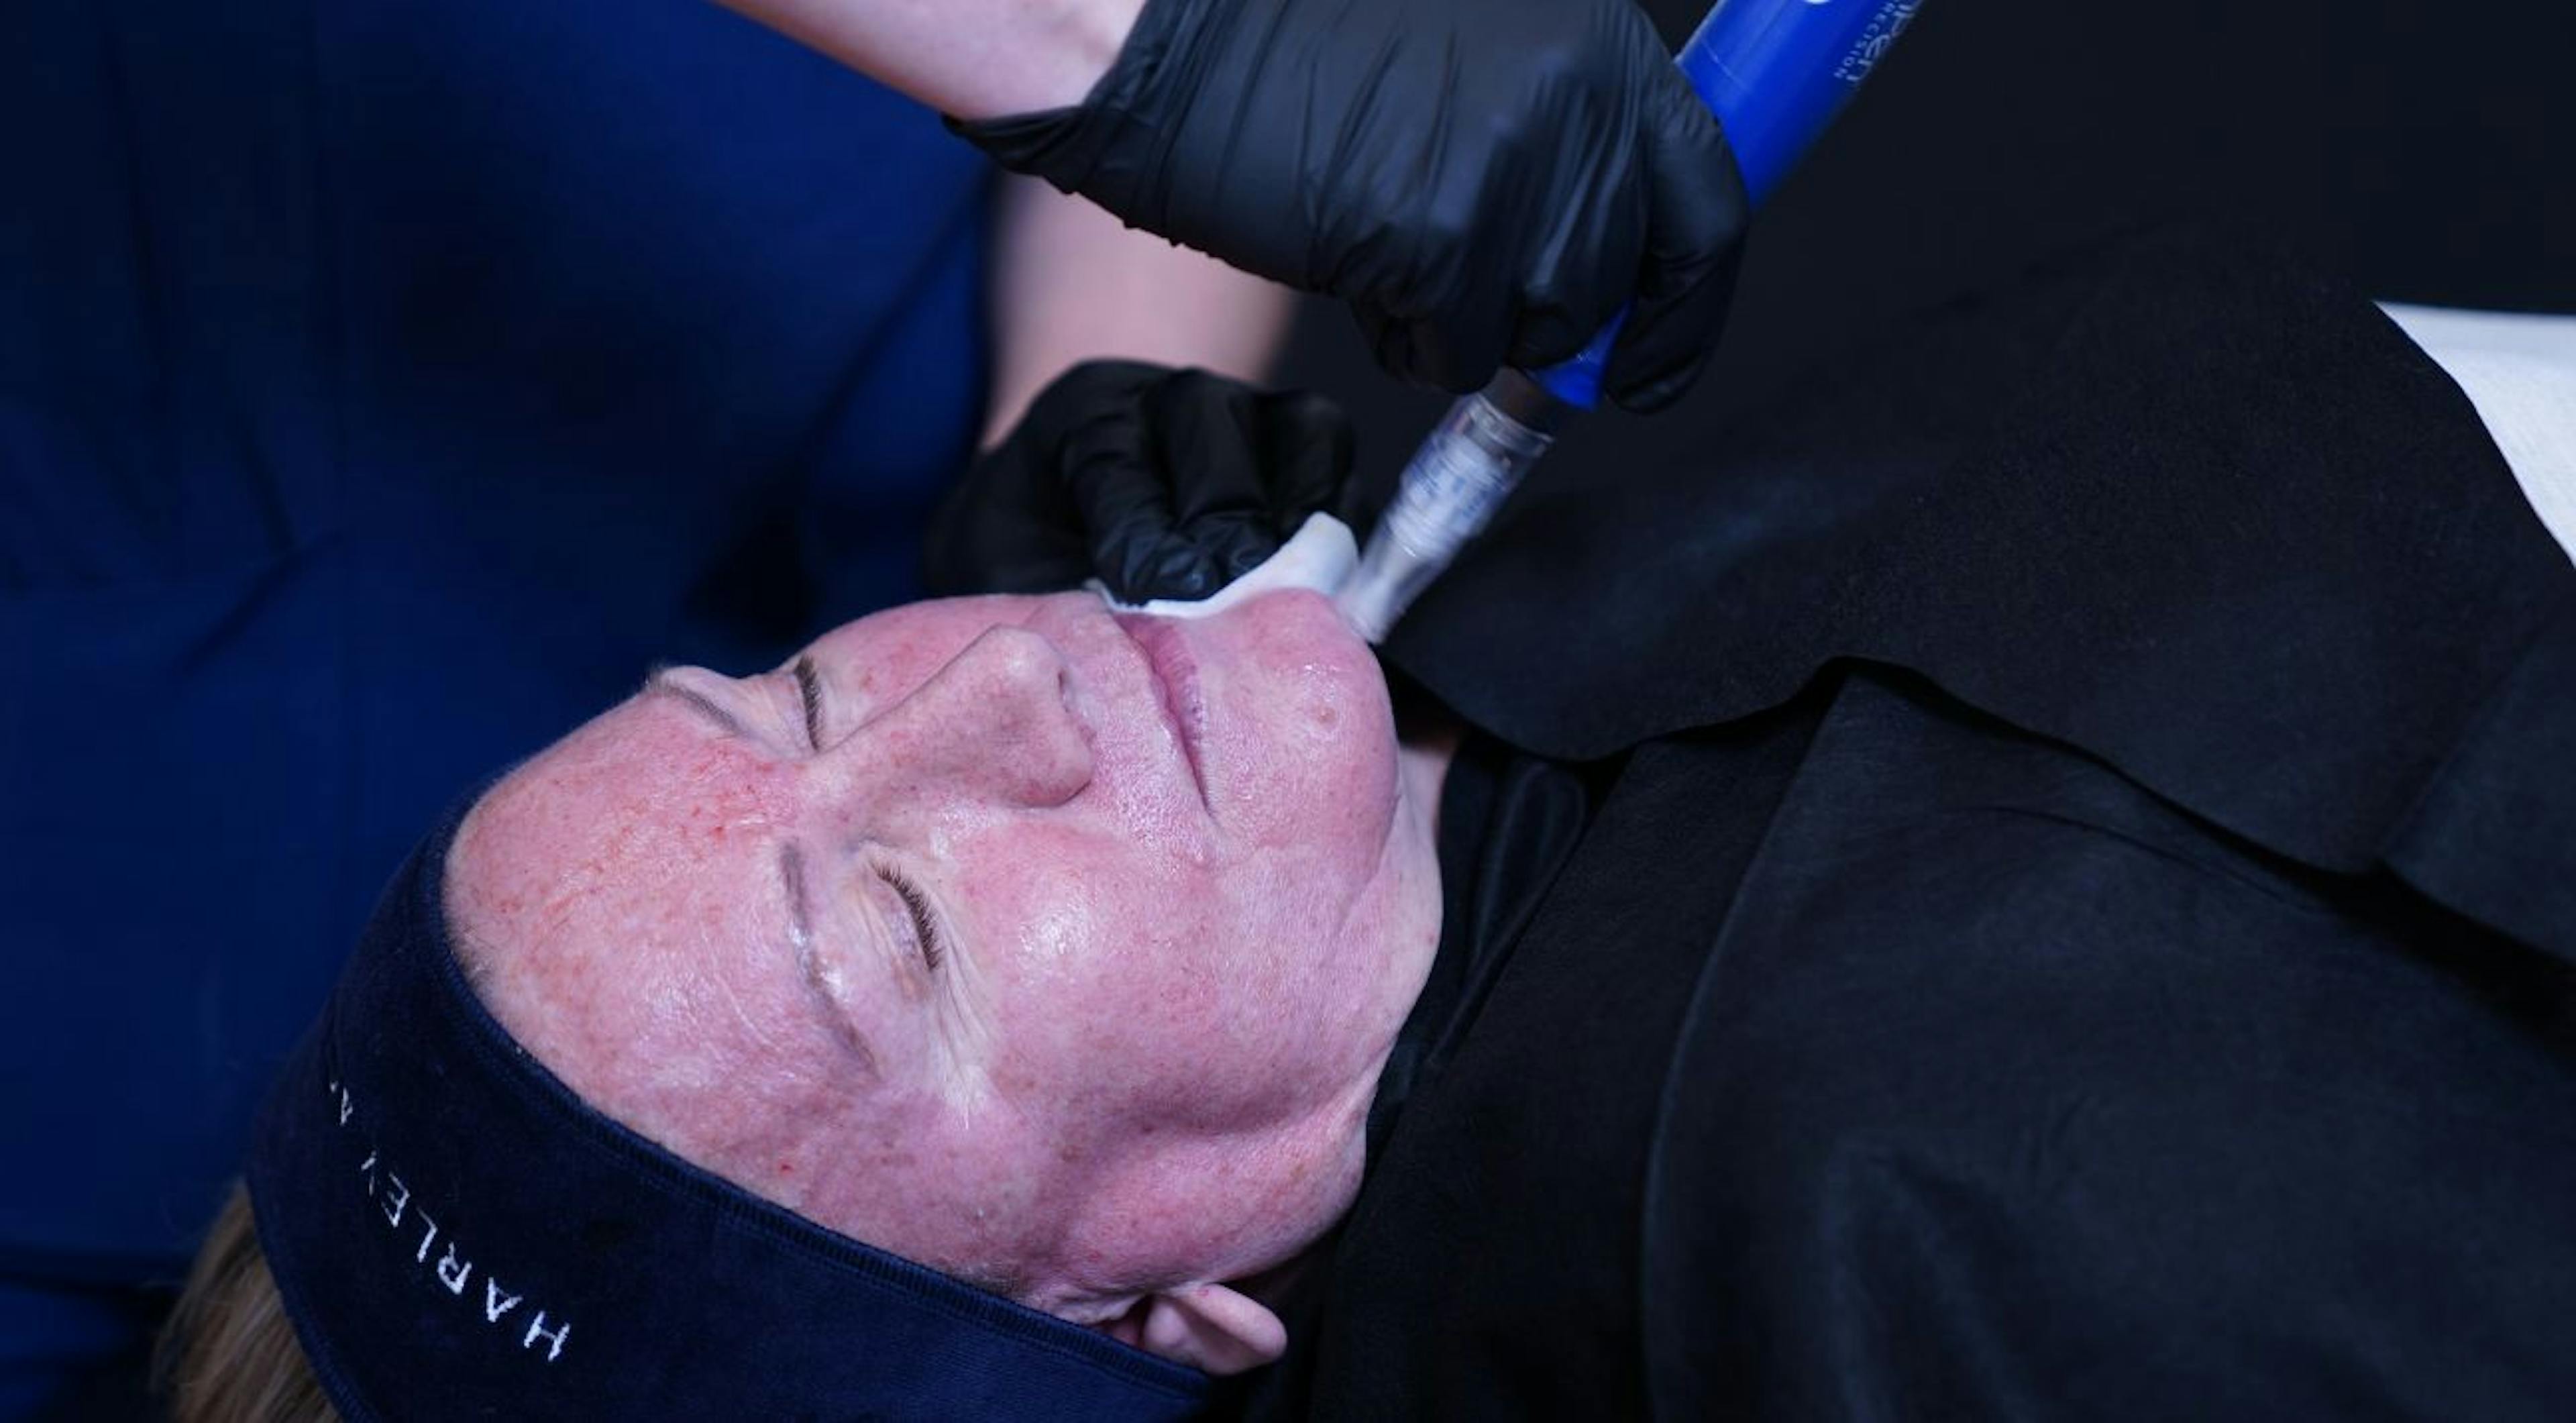 Cosmetic dermatology microneedling course at Harley Academy